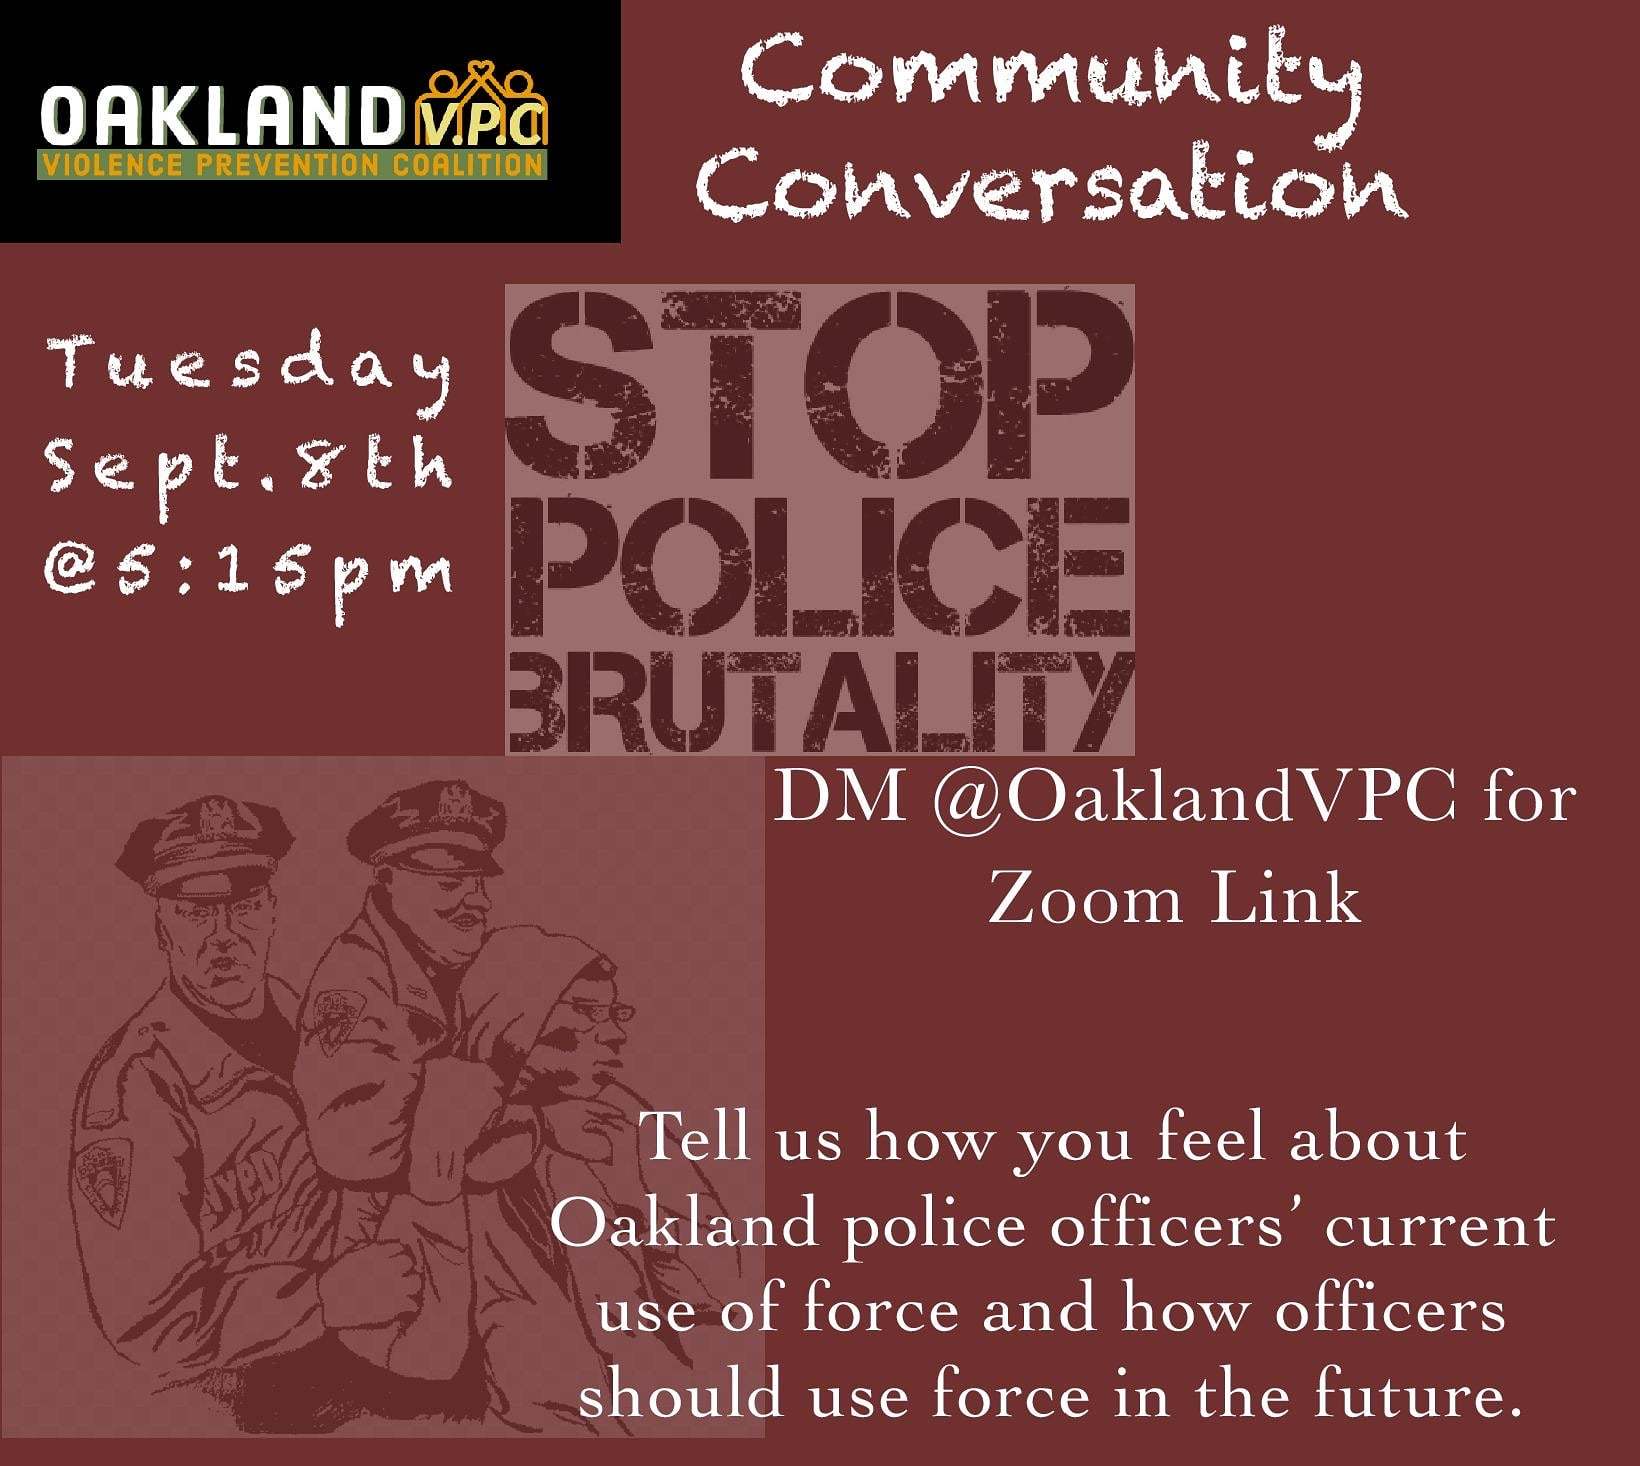 Community Engagement to Review OPD's Use of Force Policy Image